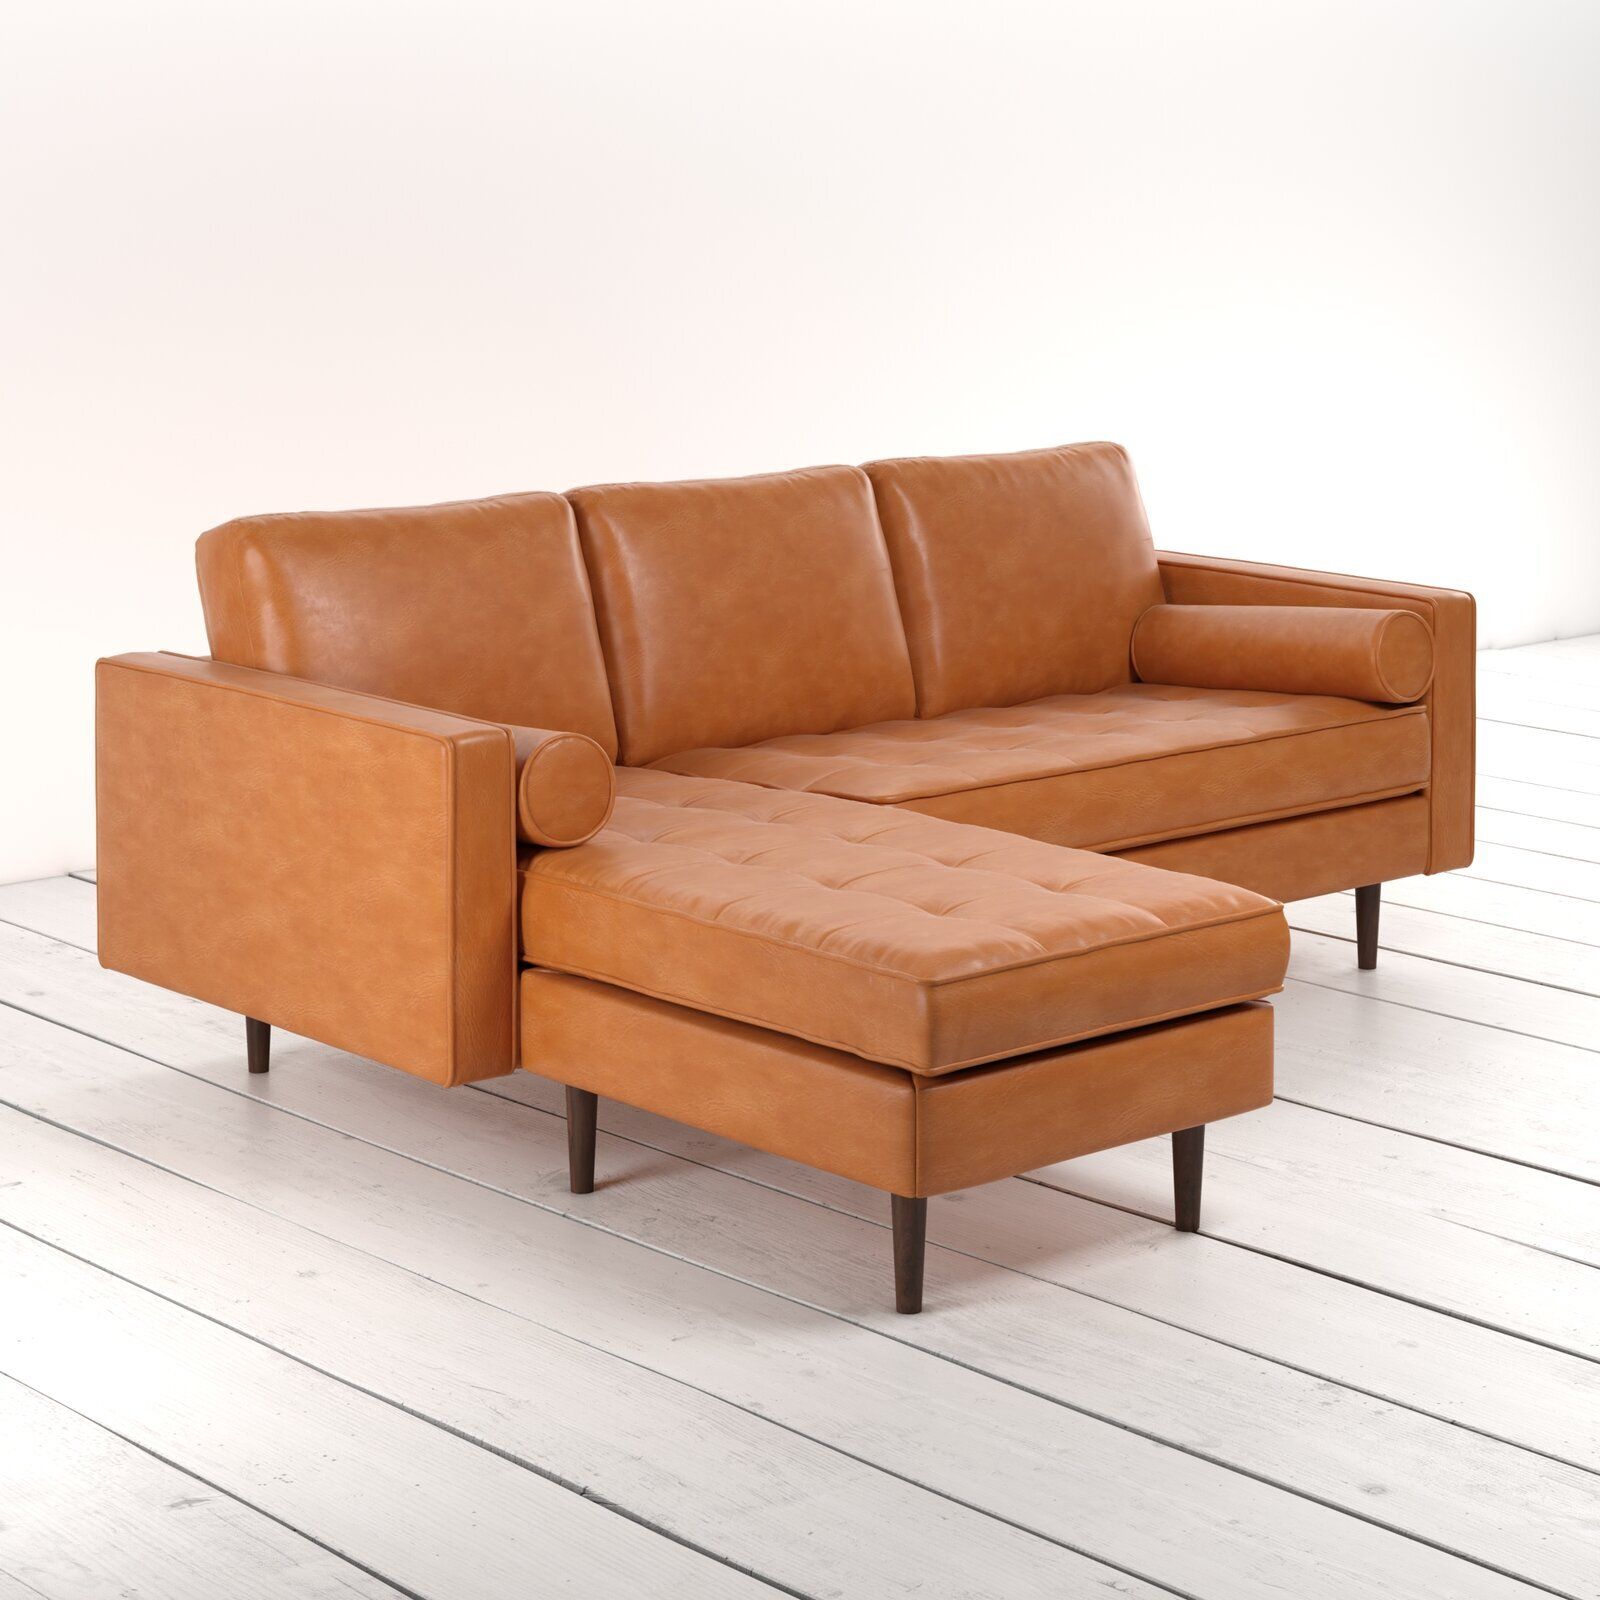 Use contemporary small leather
recliners  with ottoman to make a
perfect addition to your living space